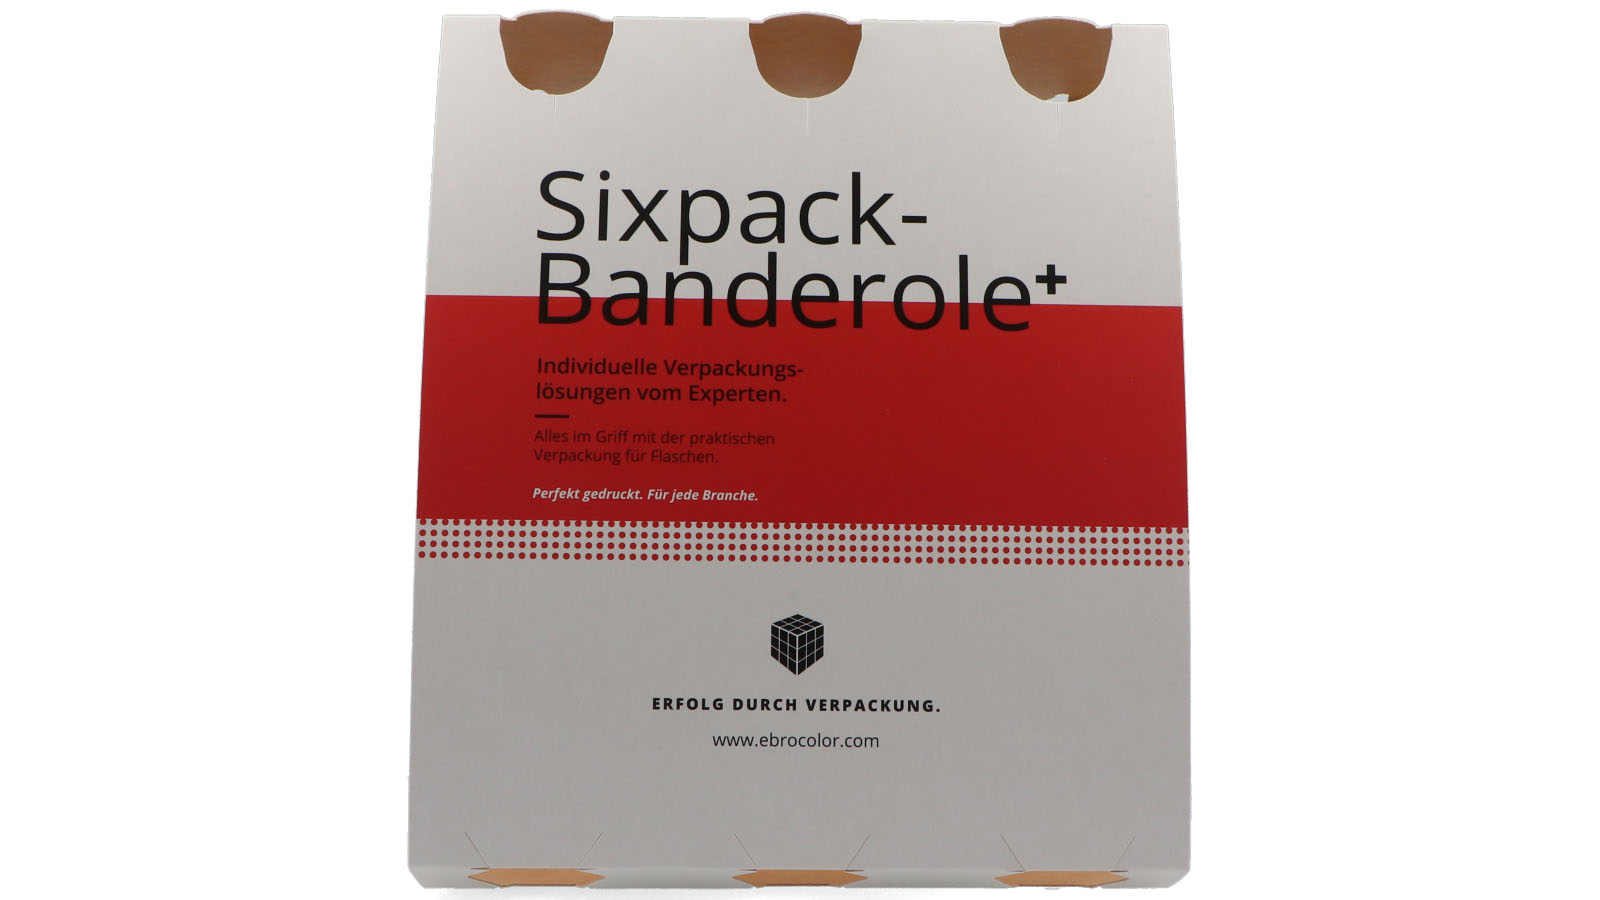 Six-pack banderole can be printed as desired